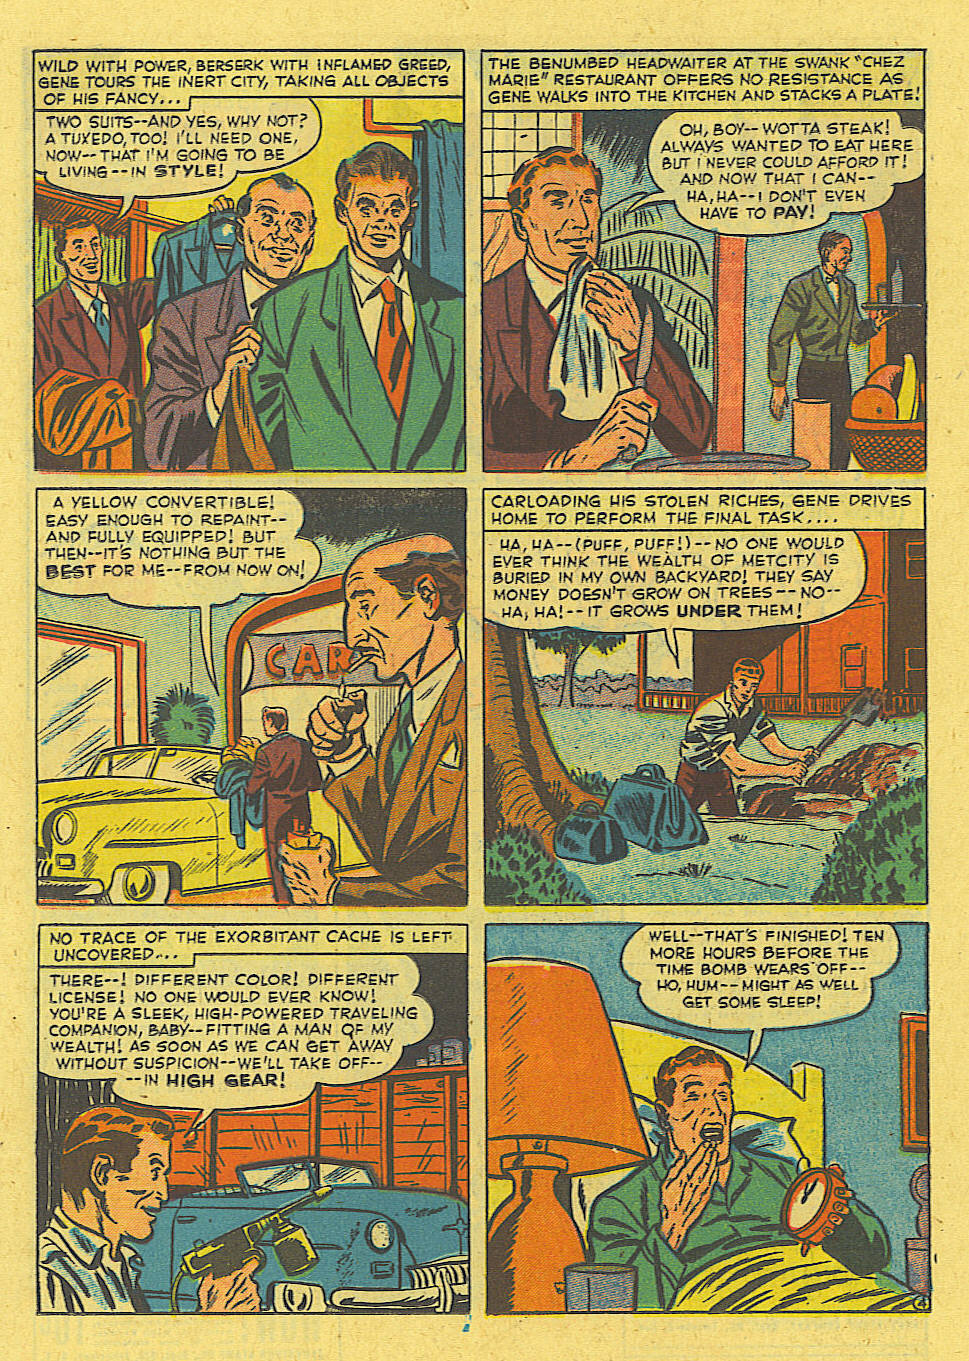 Marvel Tales (1949) 103 Page 9